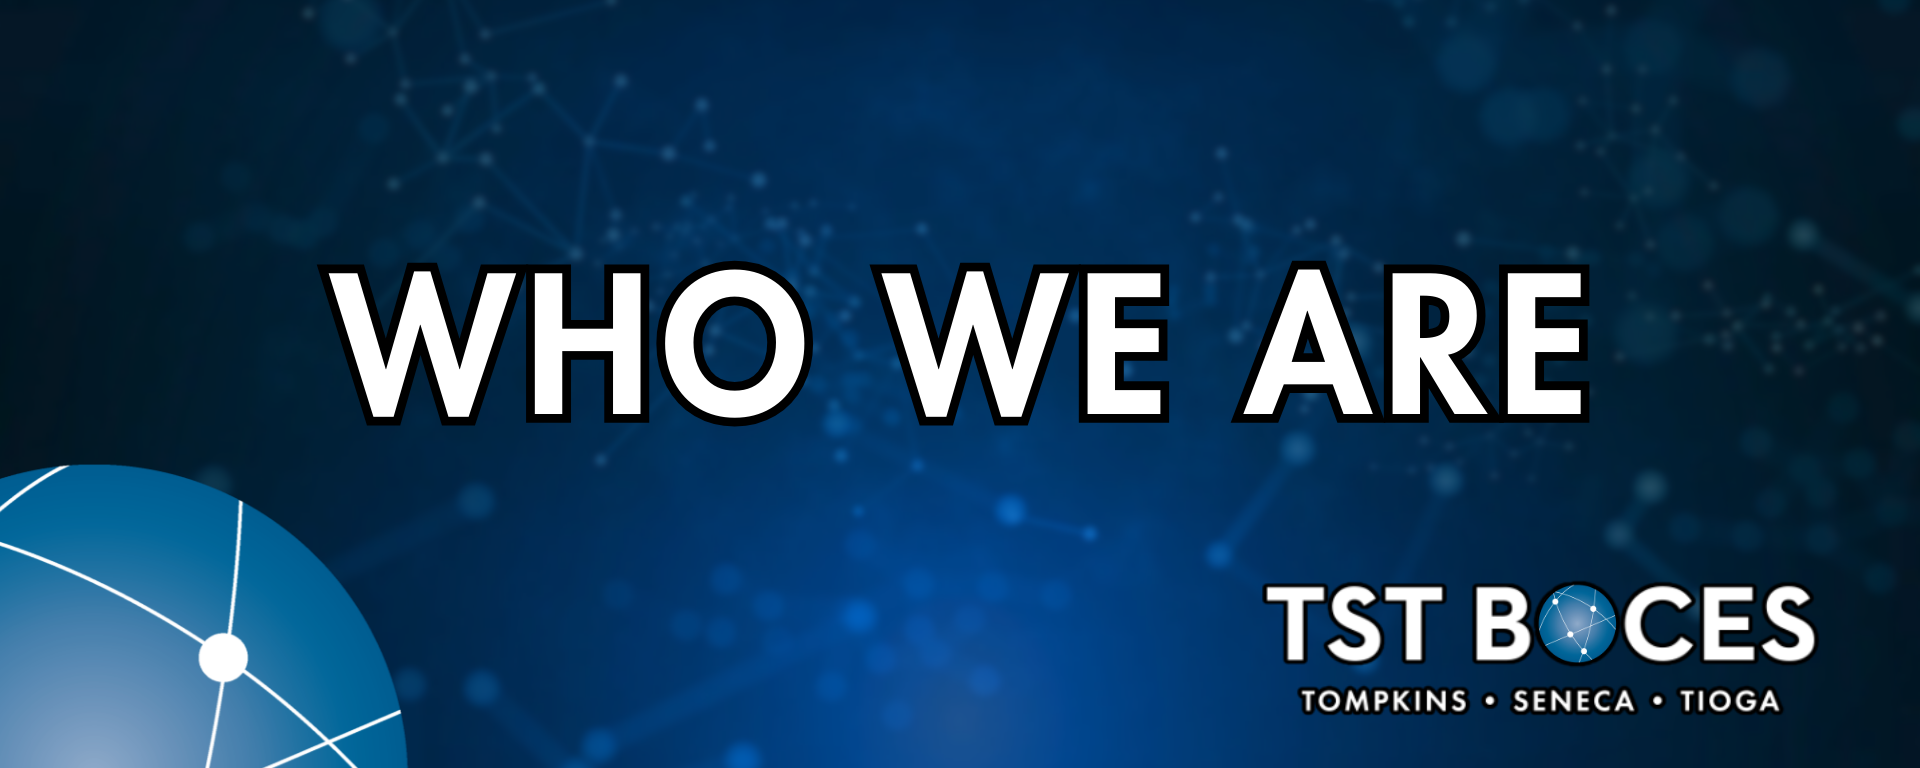 who we are banner